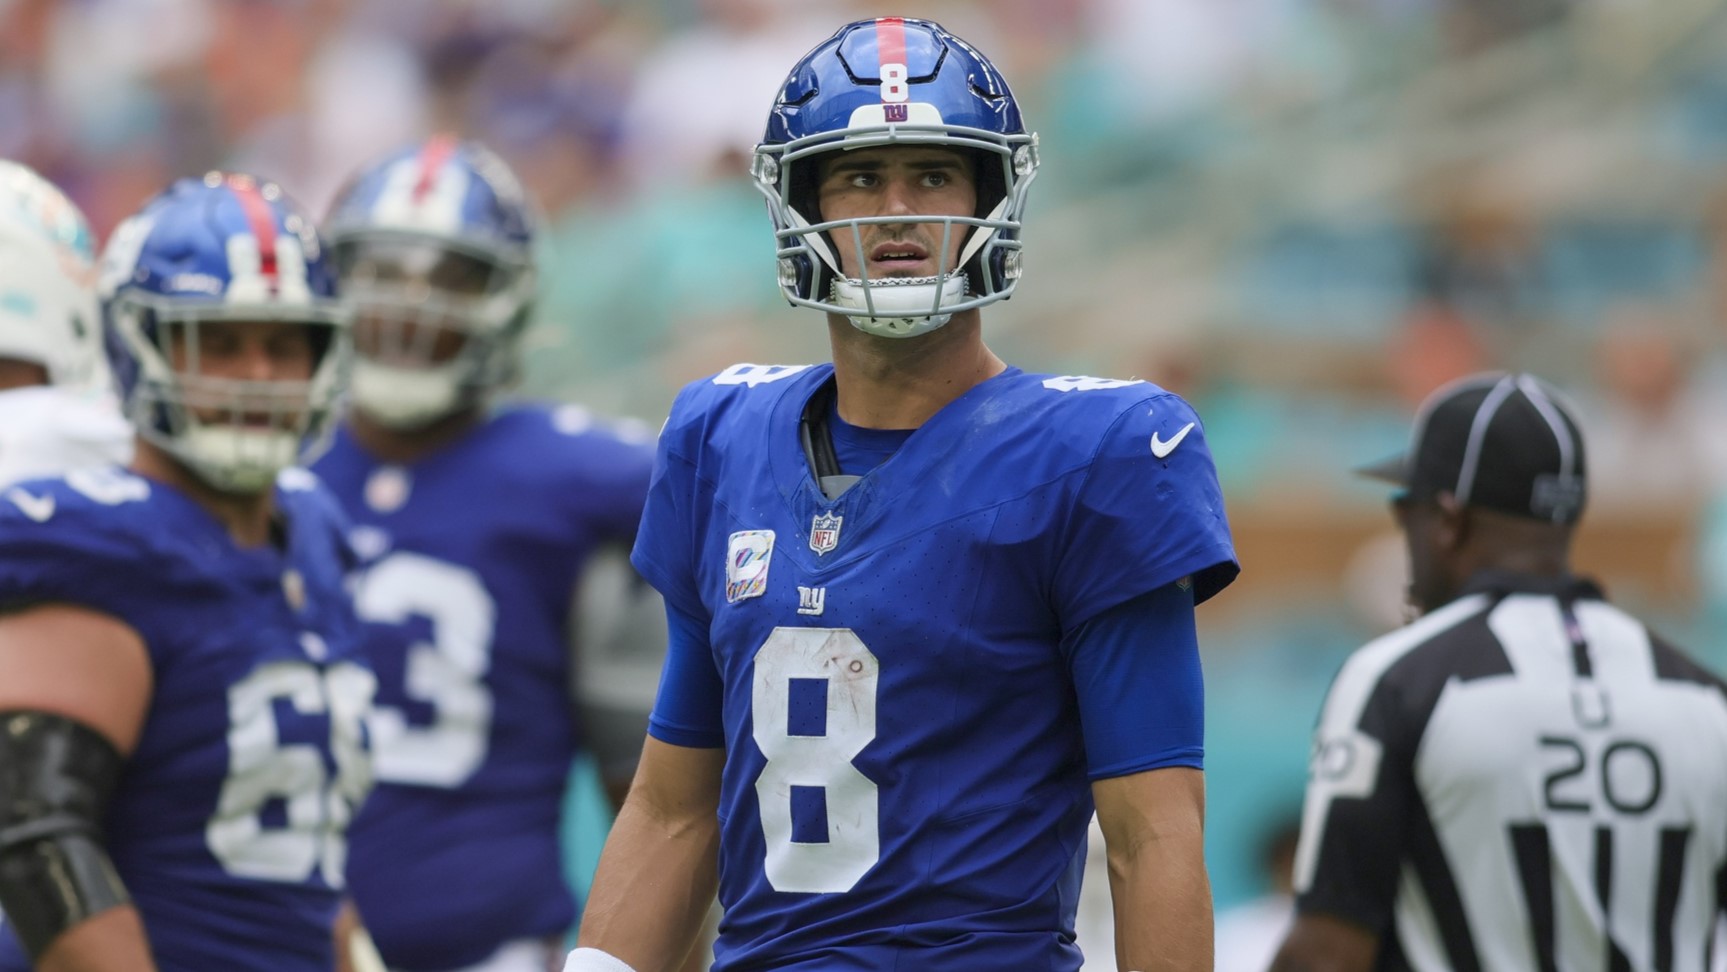 Giants expect Daniel Jones to be their starting QB once he